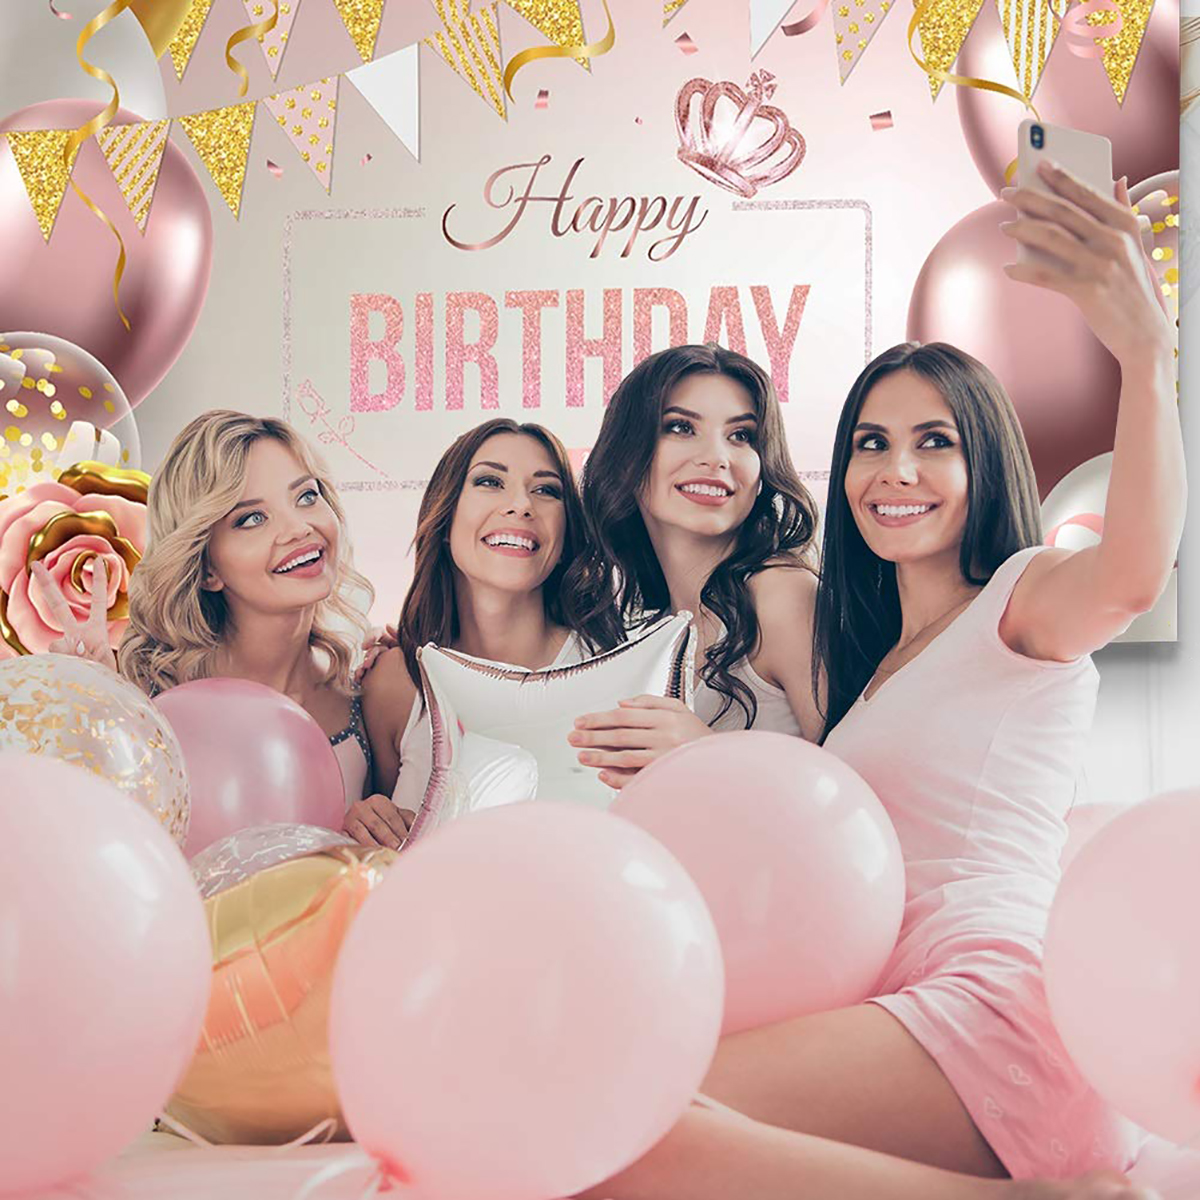 Happy-Birthday-Decorations-Banner-Large-Rose-Gold-Balloons-Backdrop-Theme-Poster-1834298-2